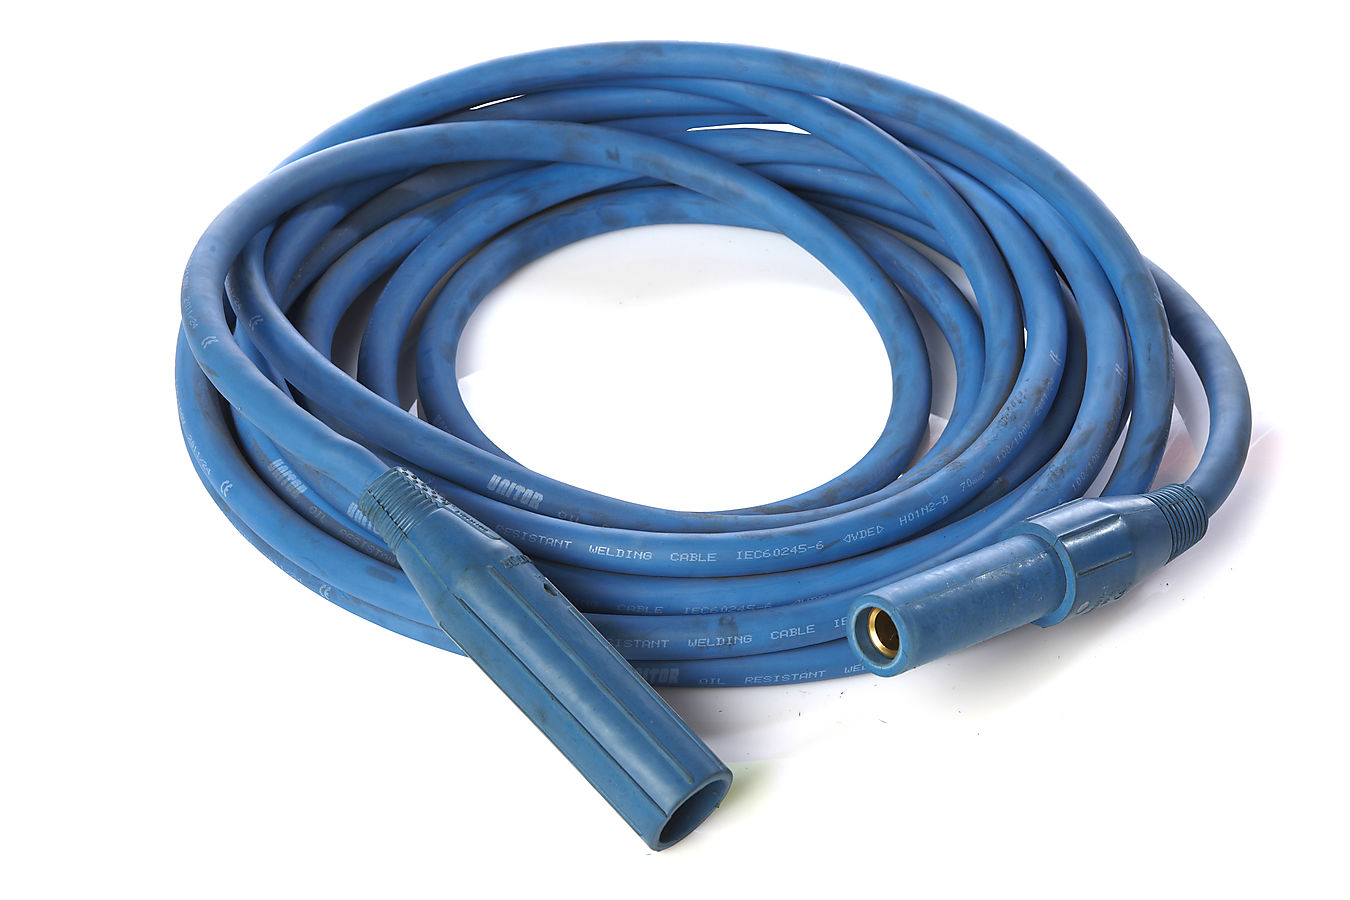 70mm WELDING CABLE AND CONNECTOR SUPPLIER IN ABU DHABI UAE rigstore.ae